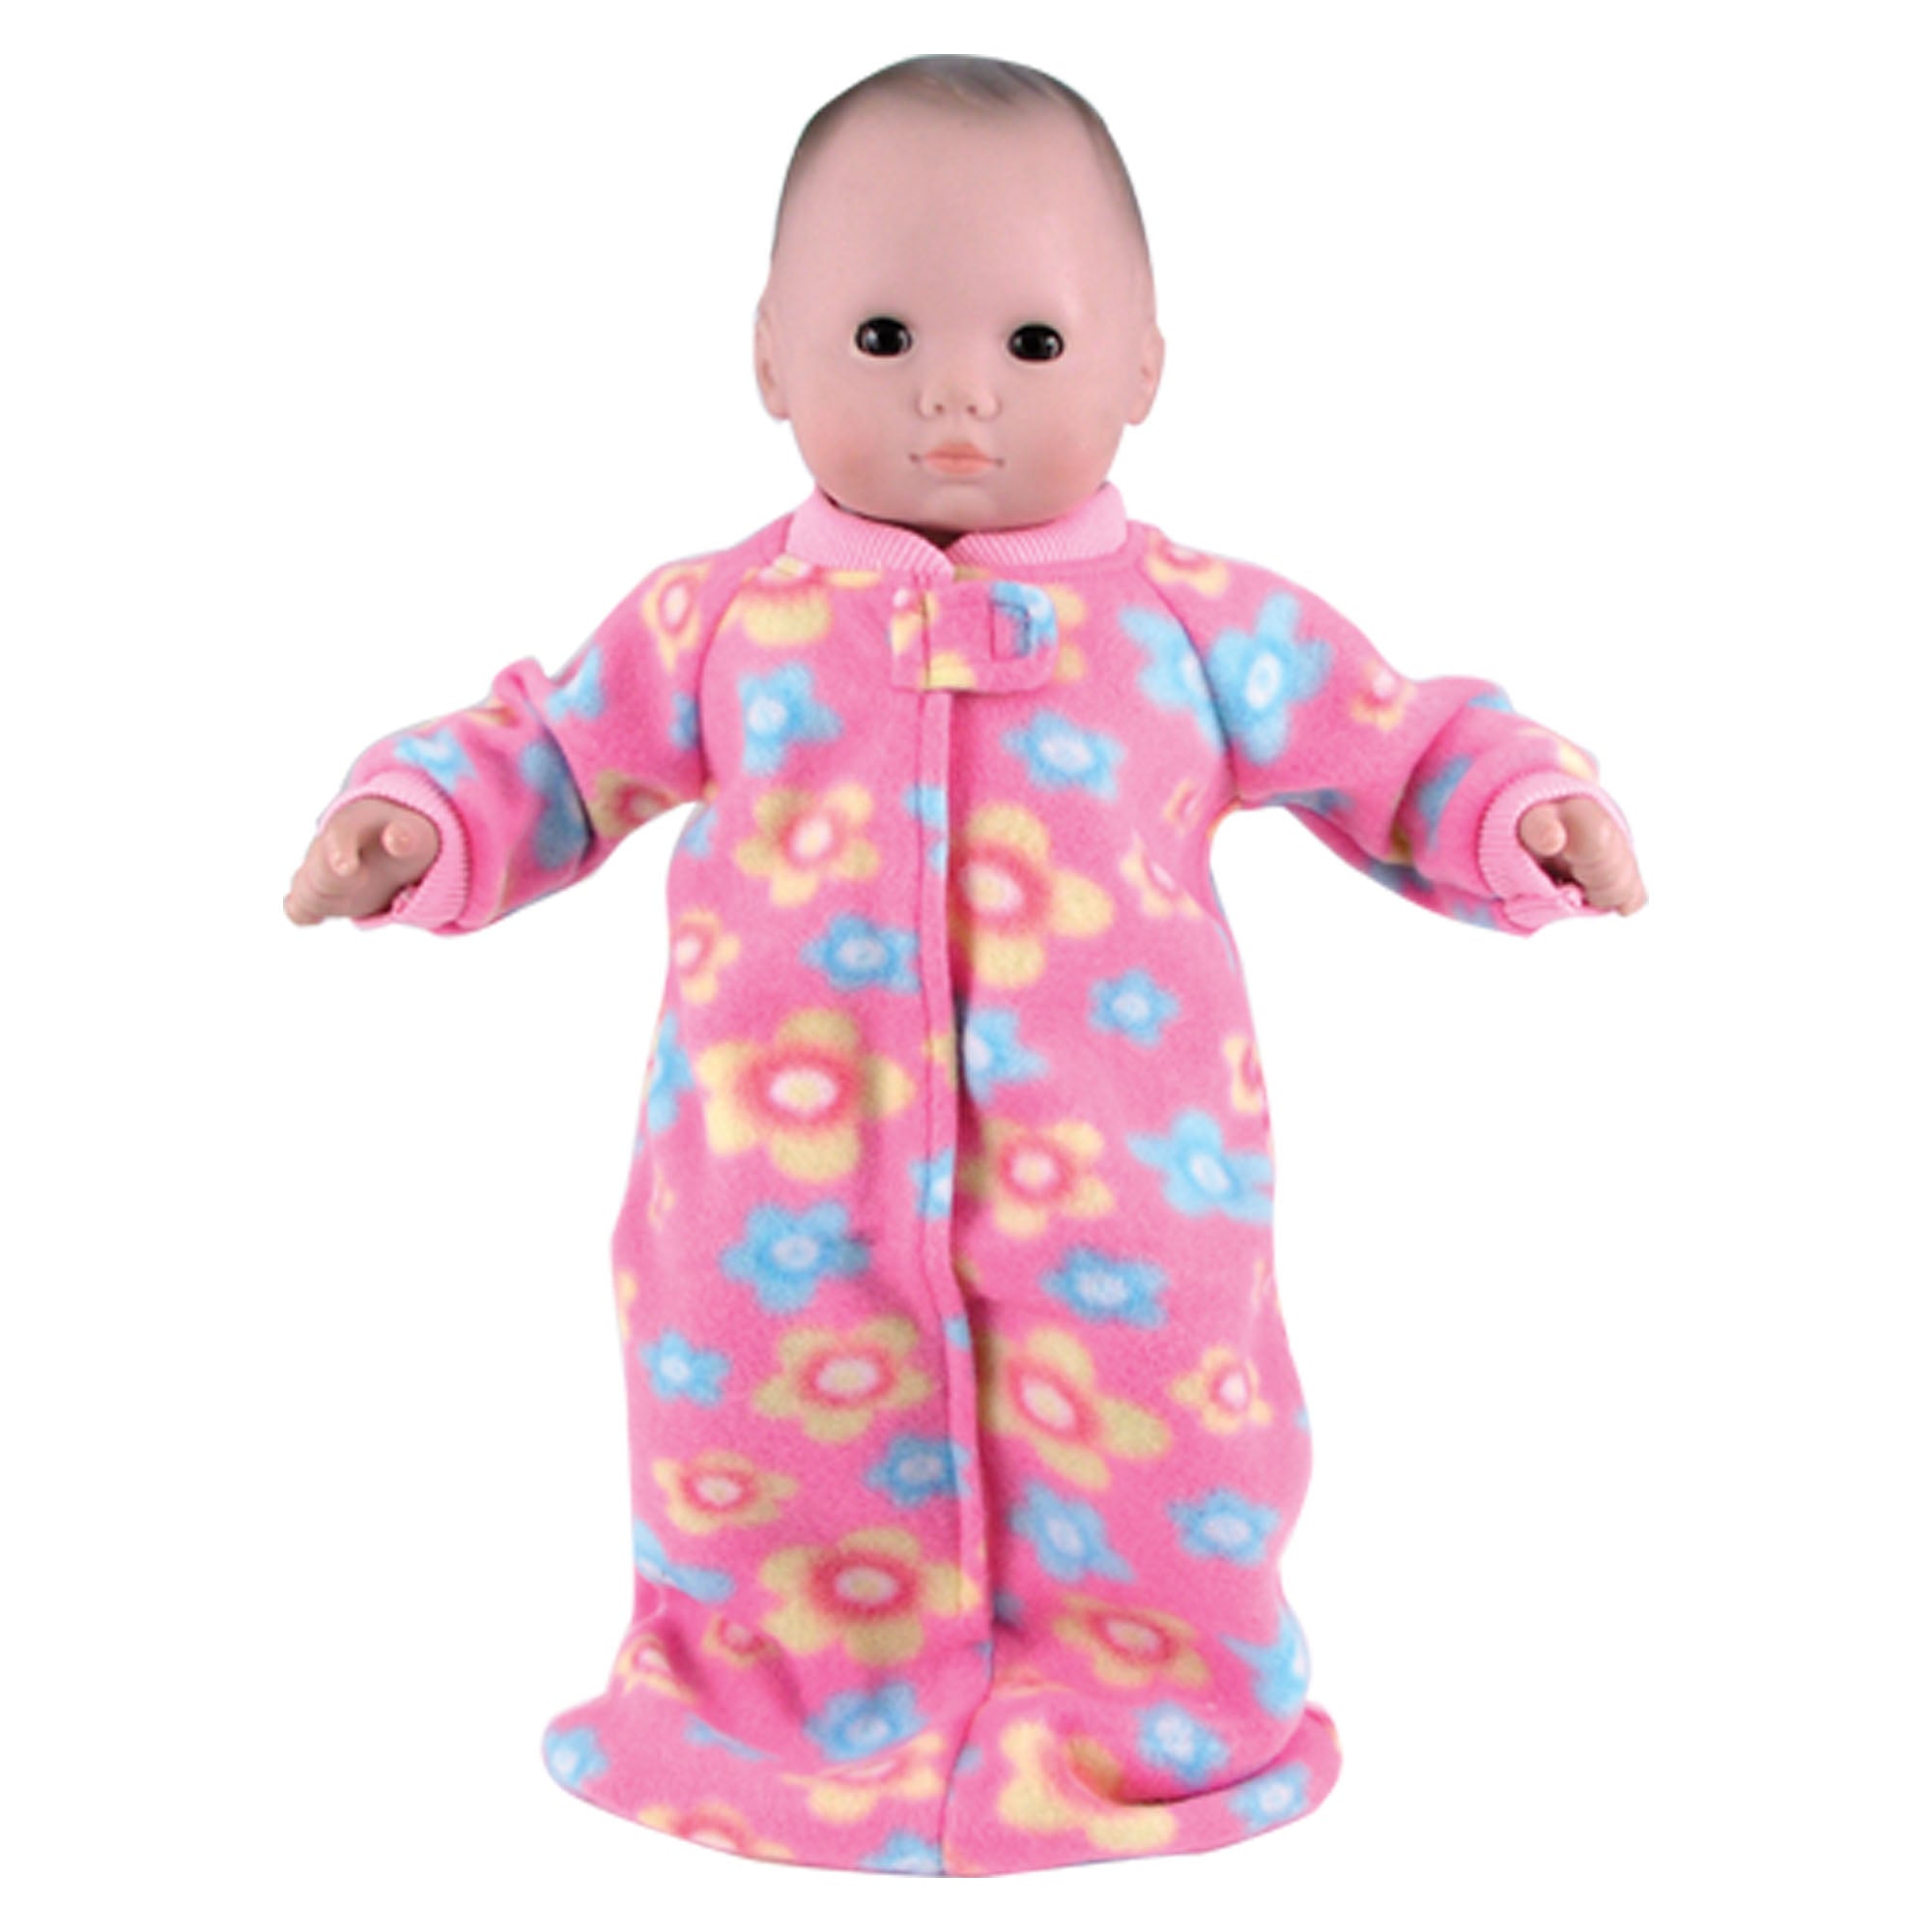 Sophia’s Cuddly-Soft Fleece Floral Print Sleeper Sack with Velcro Front Closure for 15” Baby Dolls, Pink